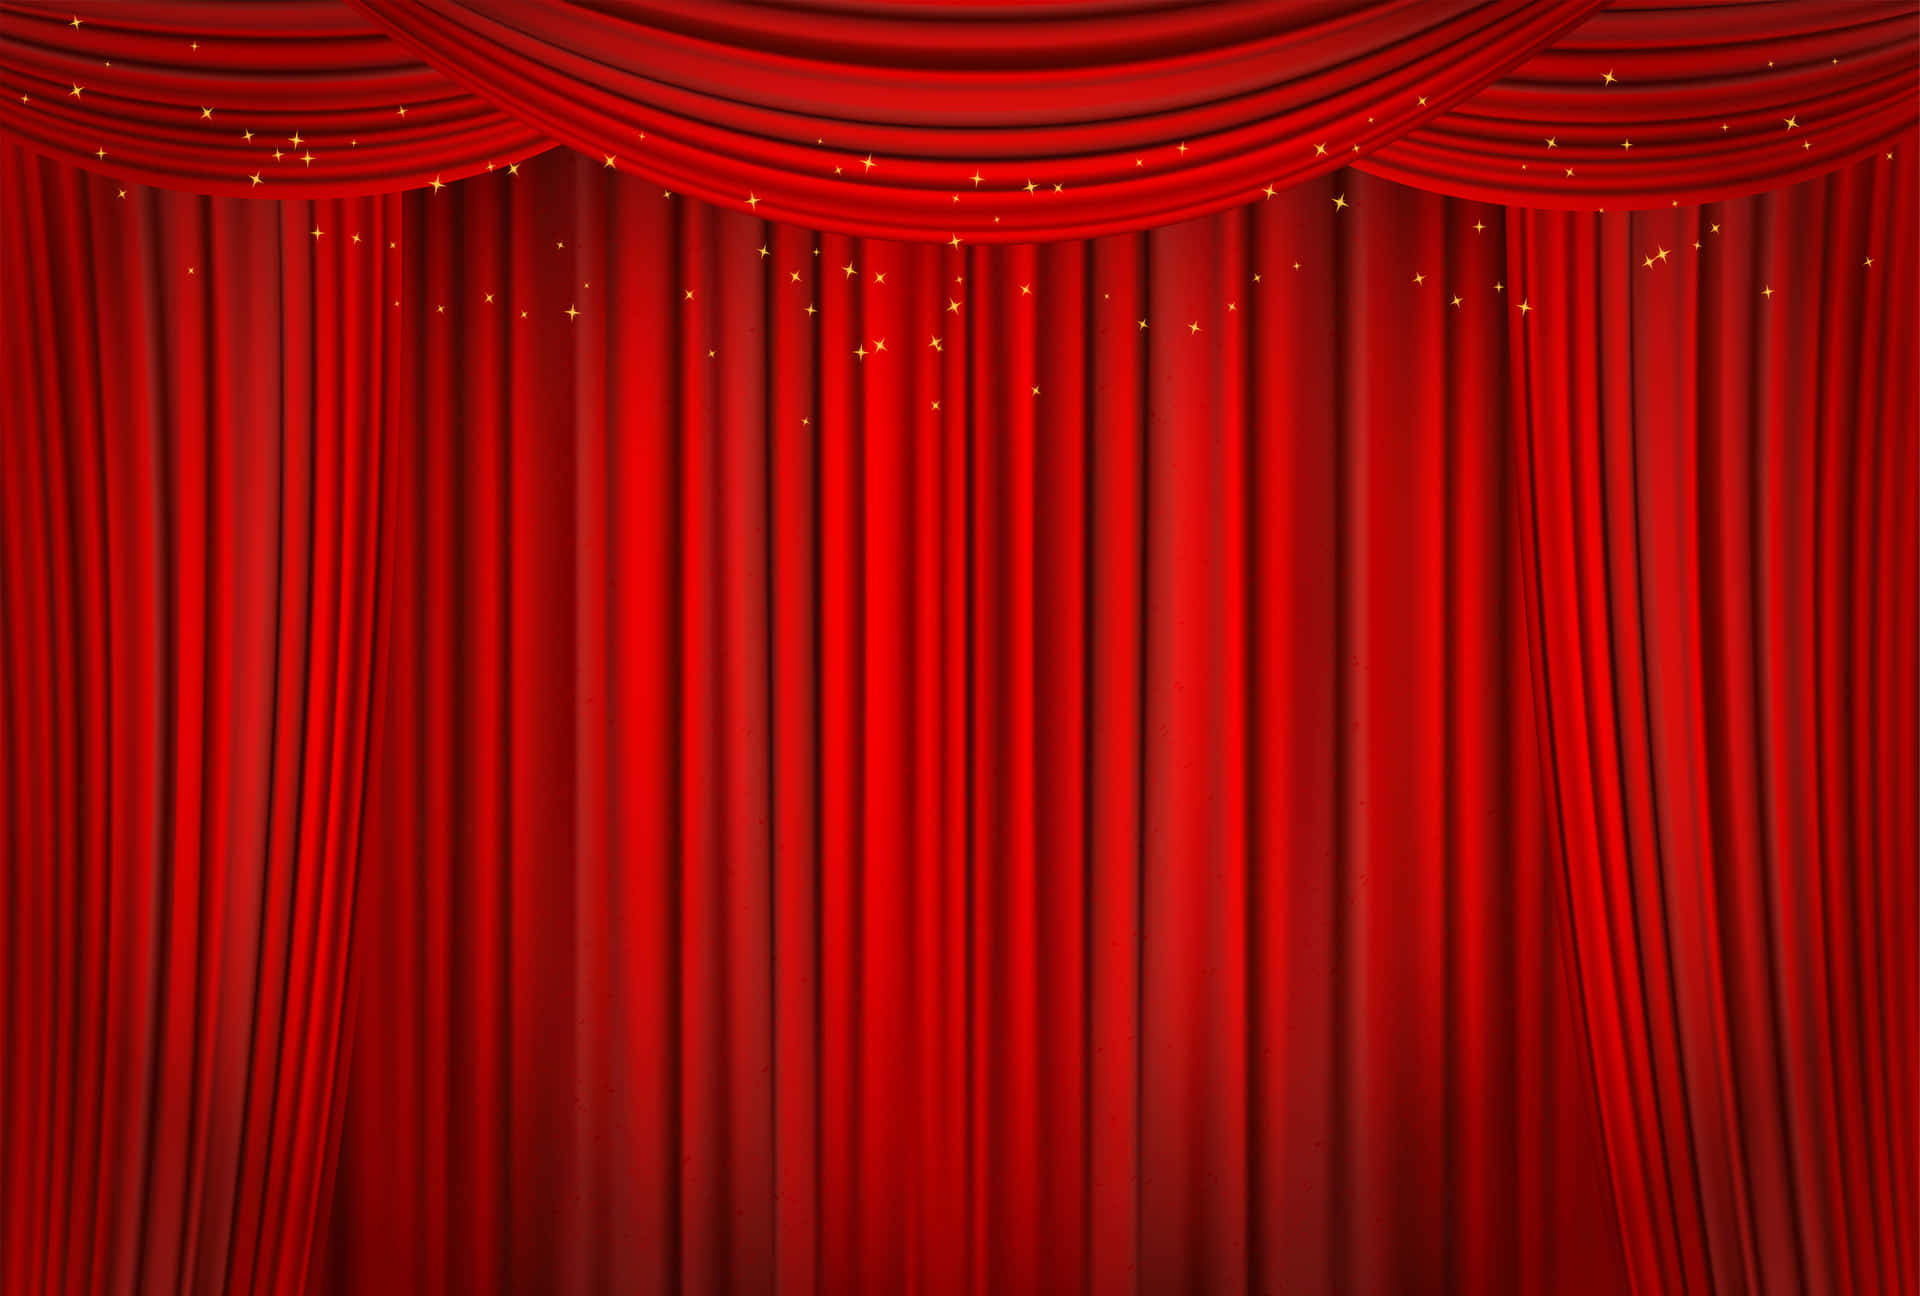 Red Curtain With Golden Stars On The Stage